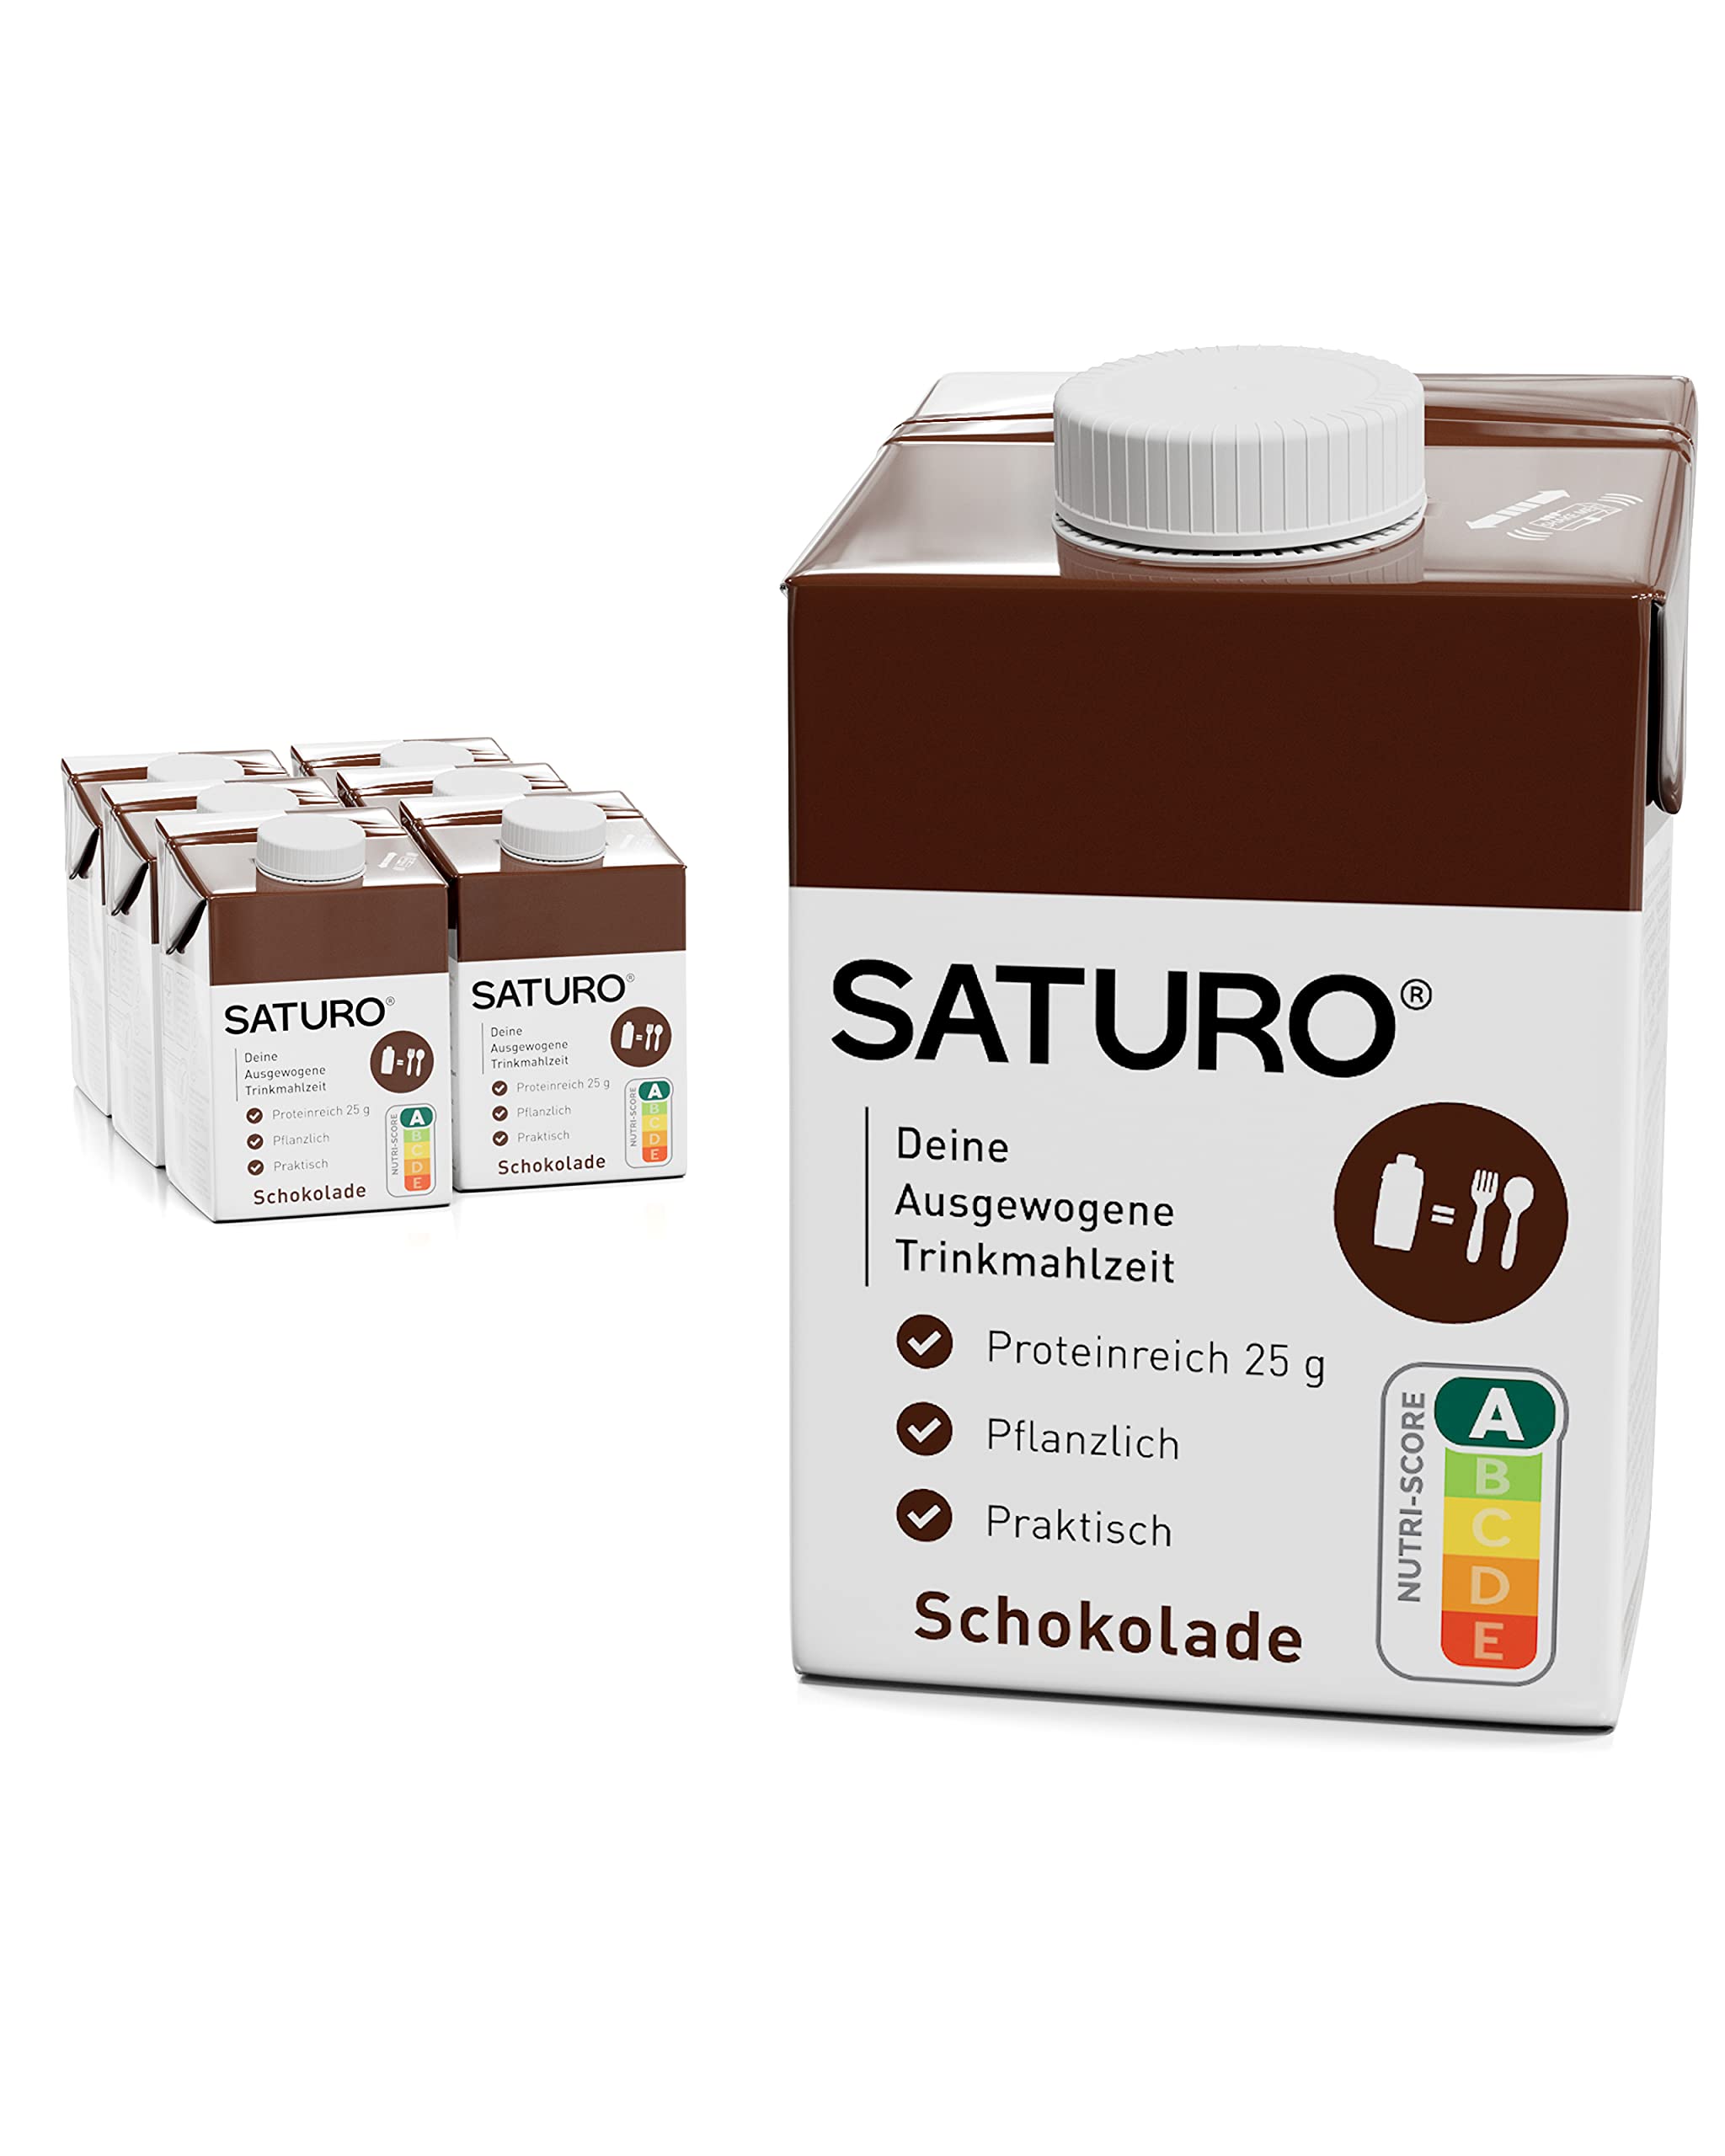 SATURO® Meal Replacement Shake Chocolate | Astronaut Food With Protein & 500kcal | Vegan | Drinkable Meal With Essential Nutrients | 6 x 500 ml